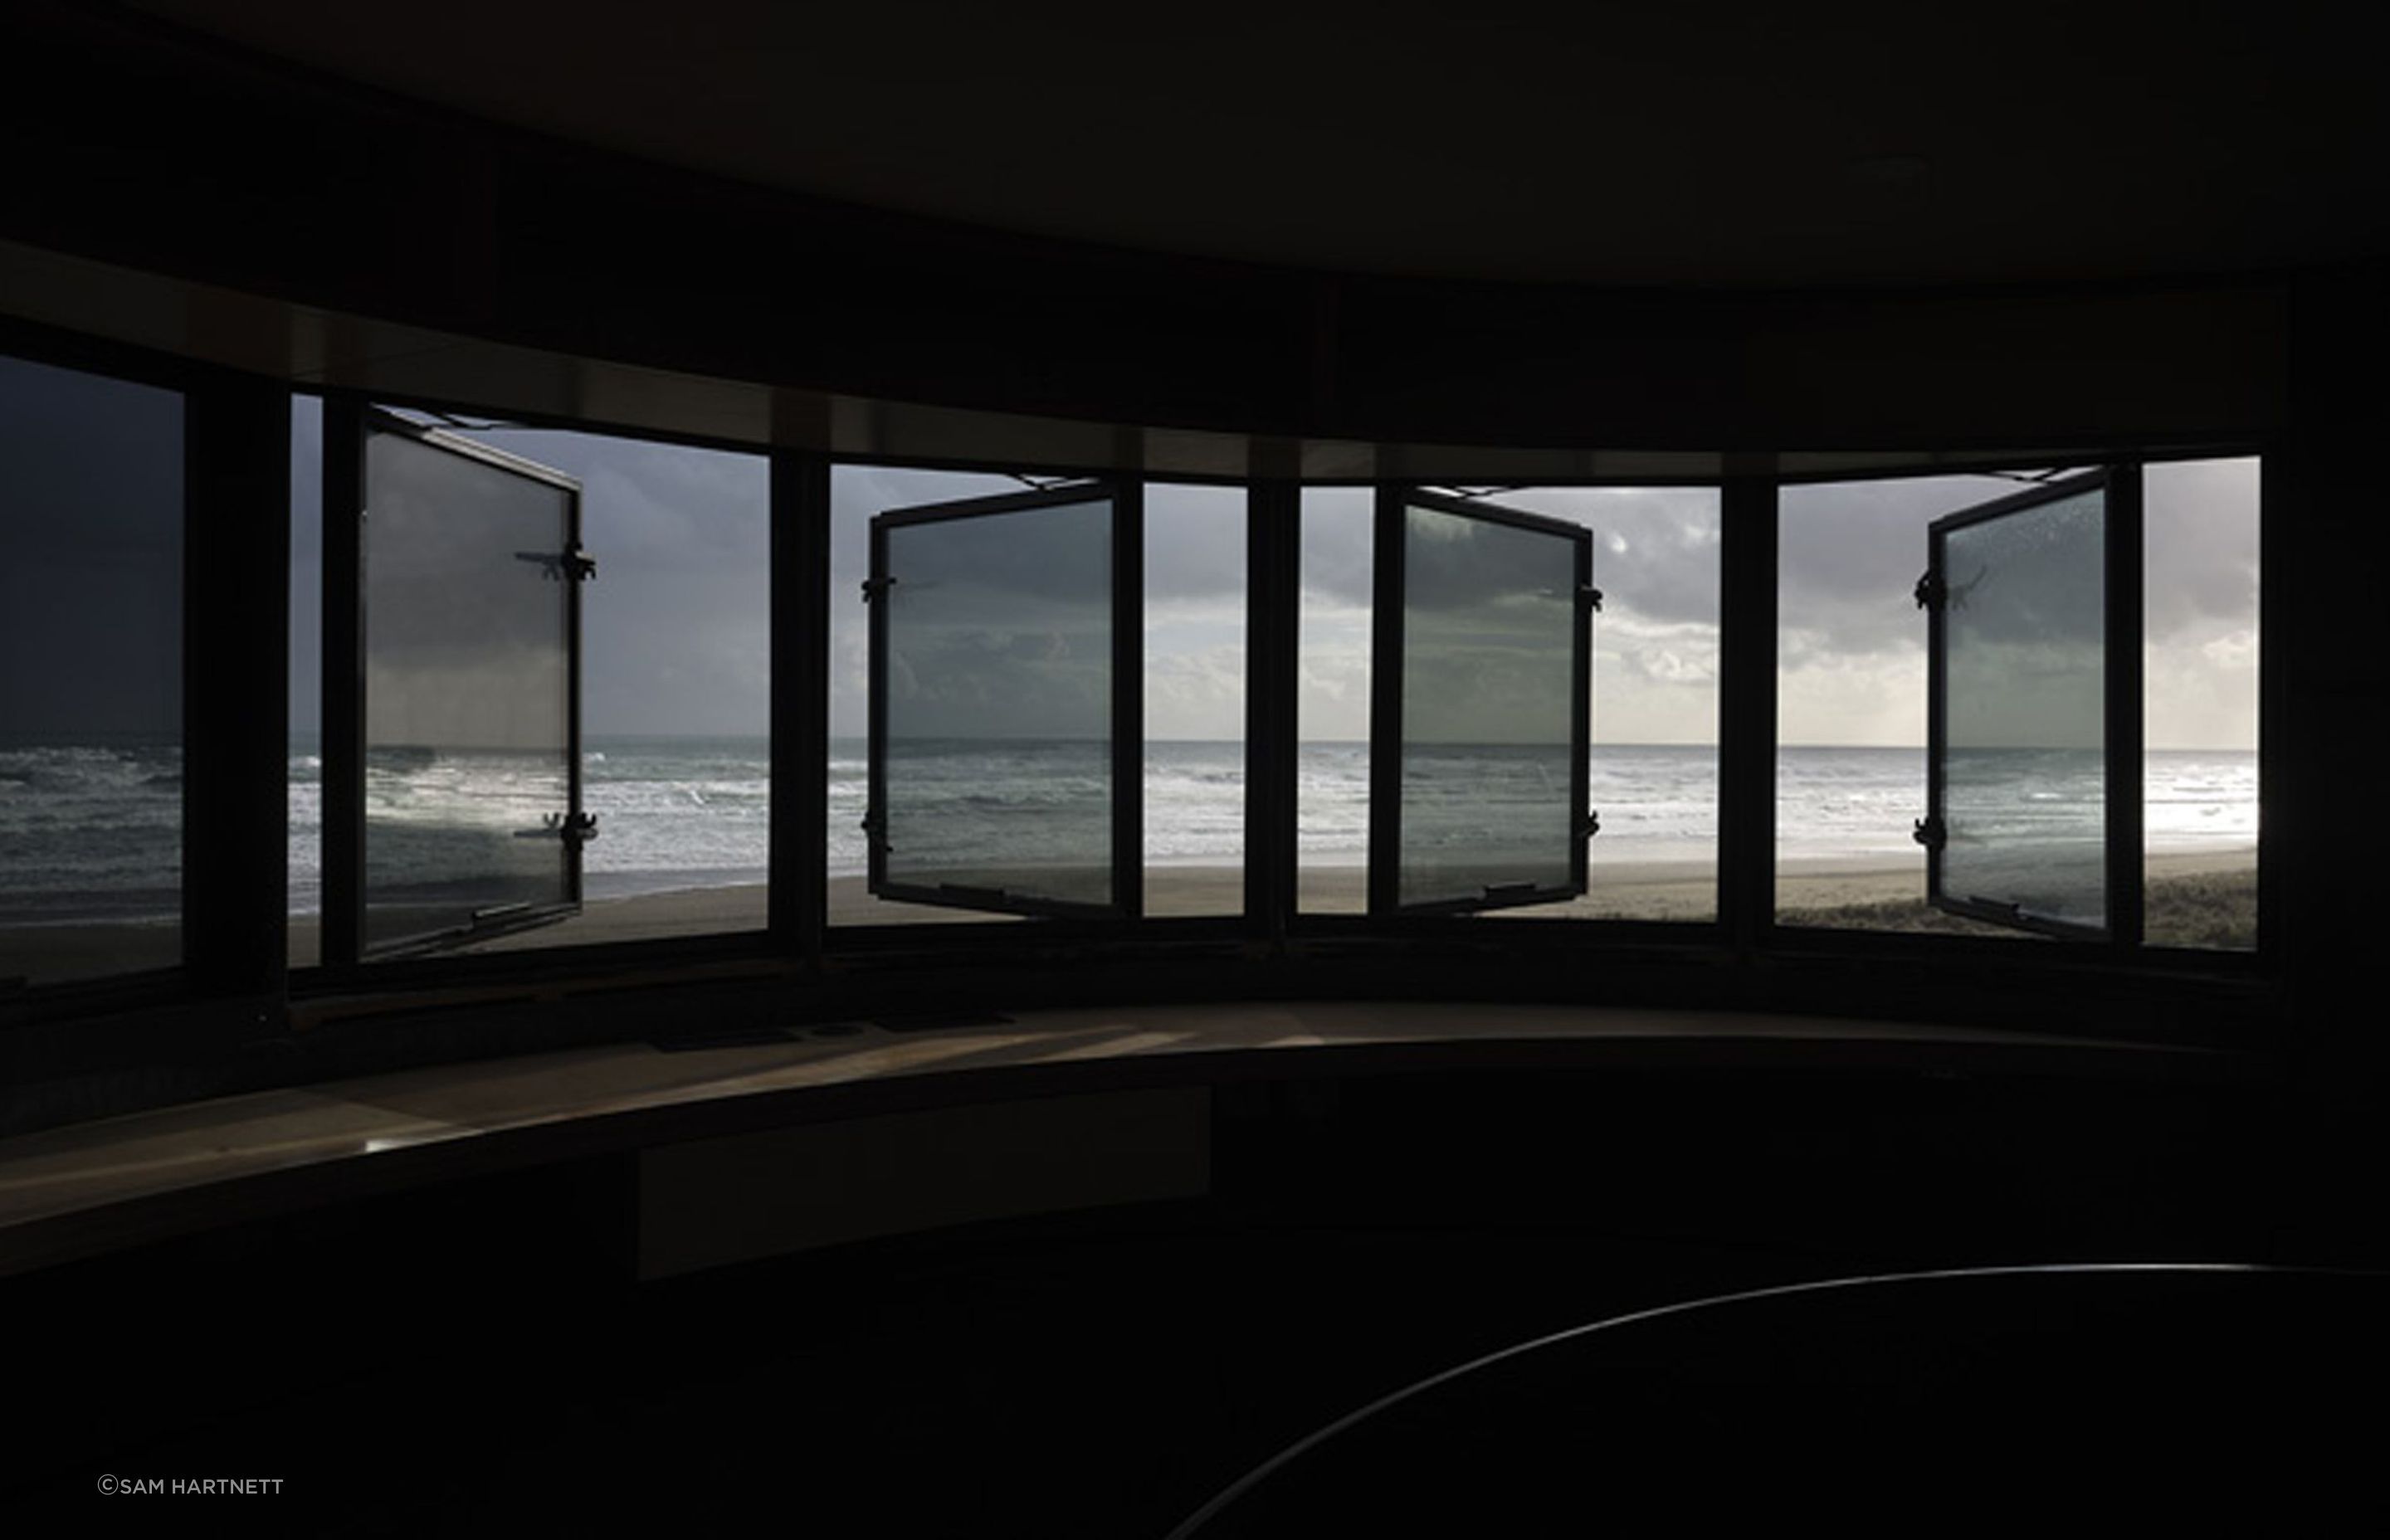 The tower's operable windows, providing protection from the coastal winds.